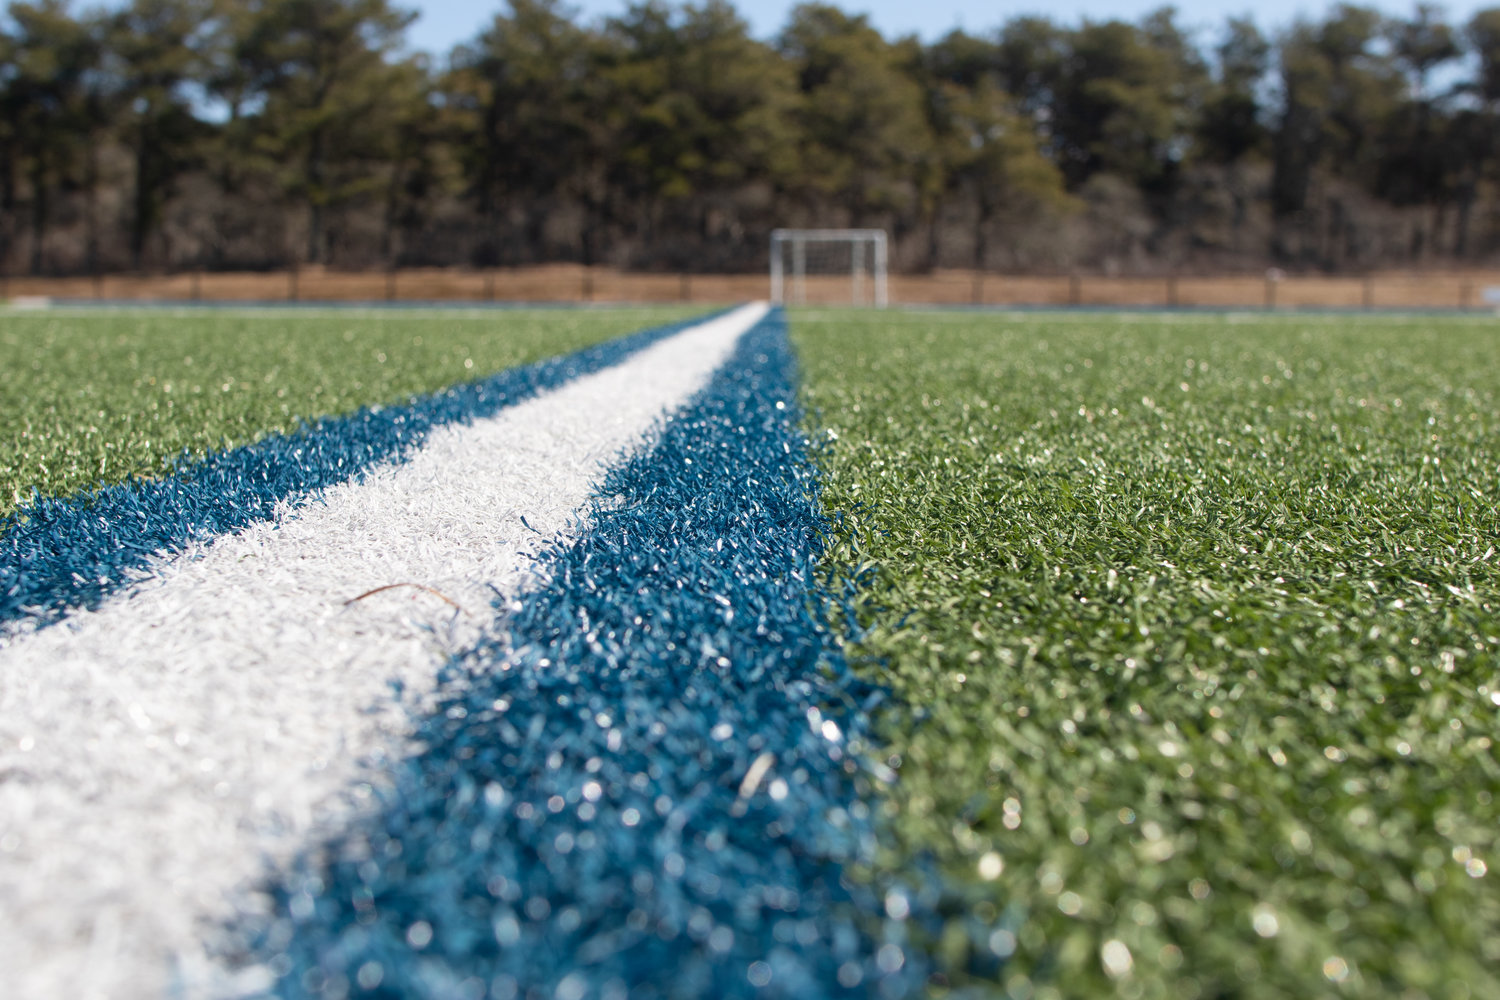 Year in Review Top Story: Presence of PFAS in artificial turf fields causes school to pause plans